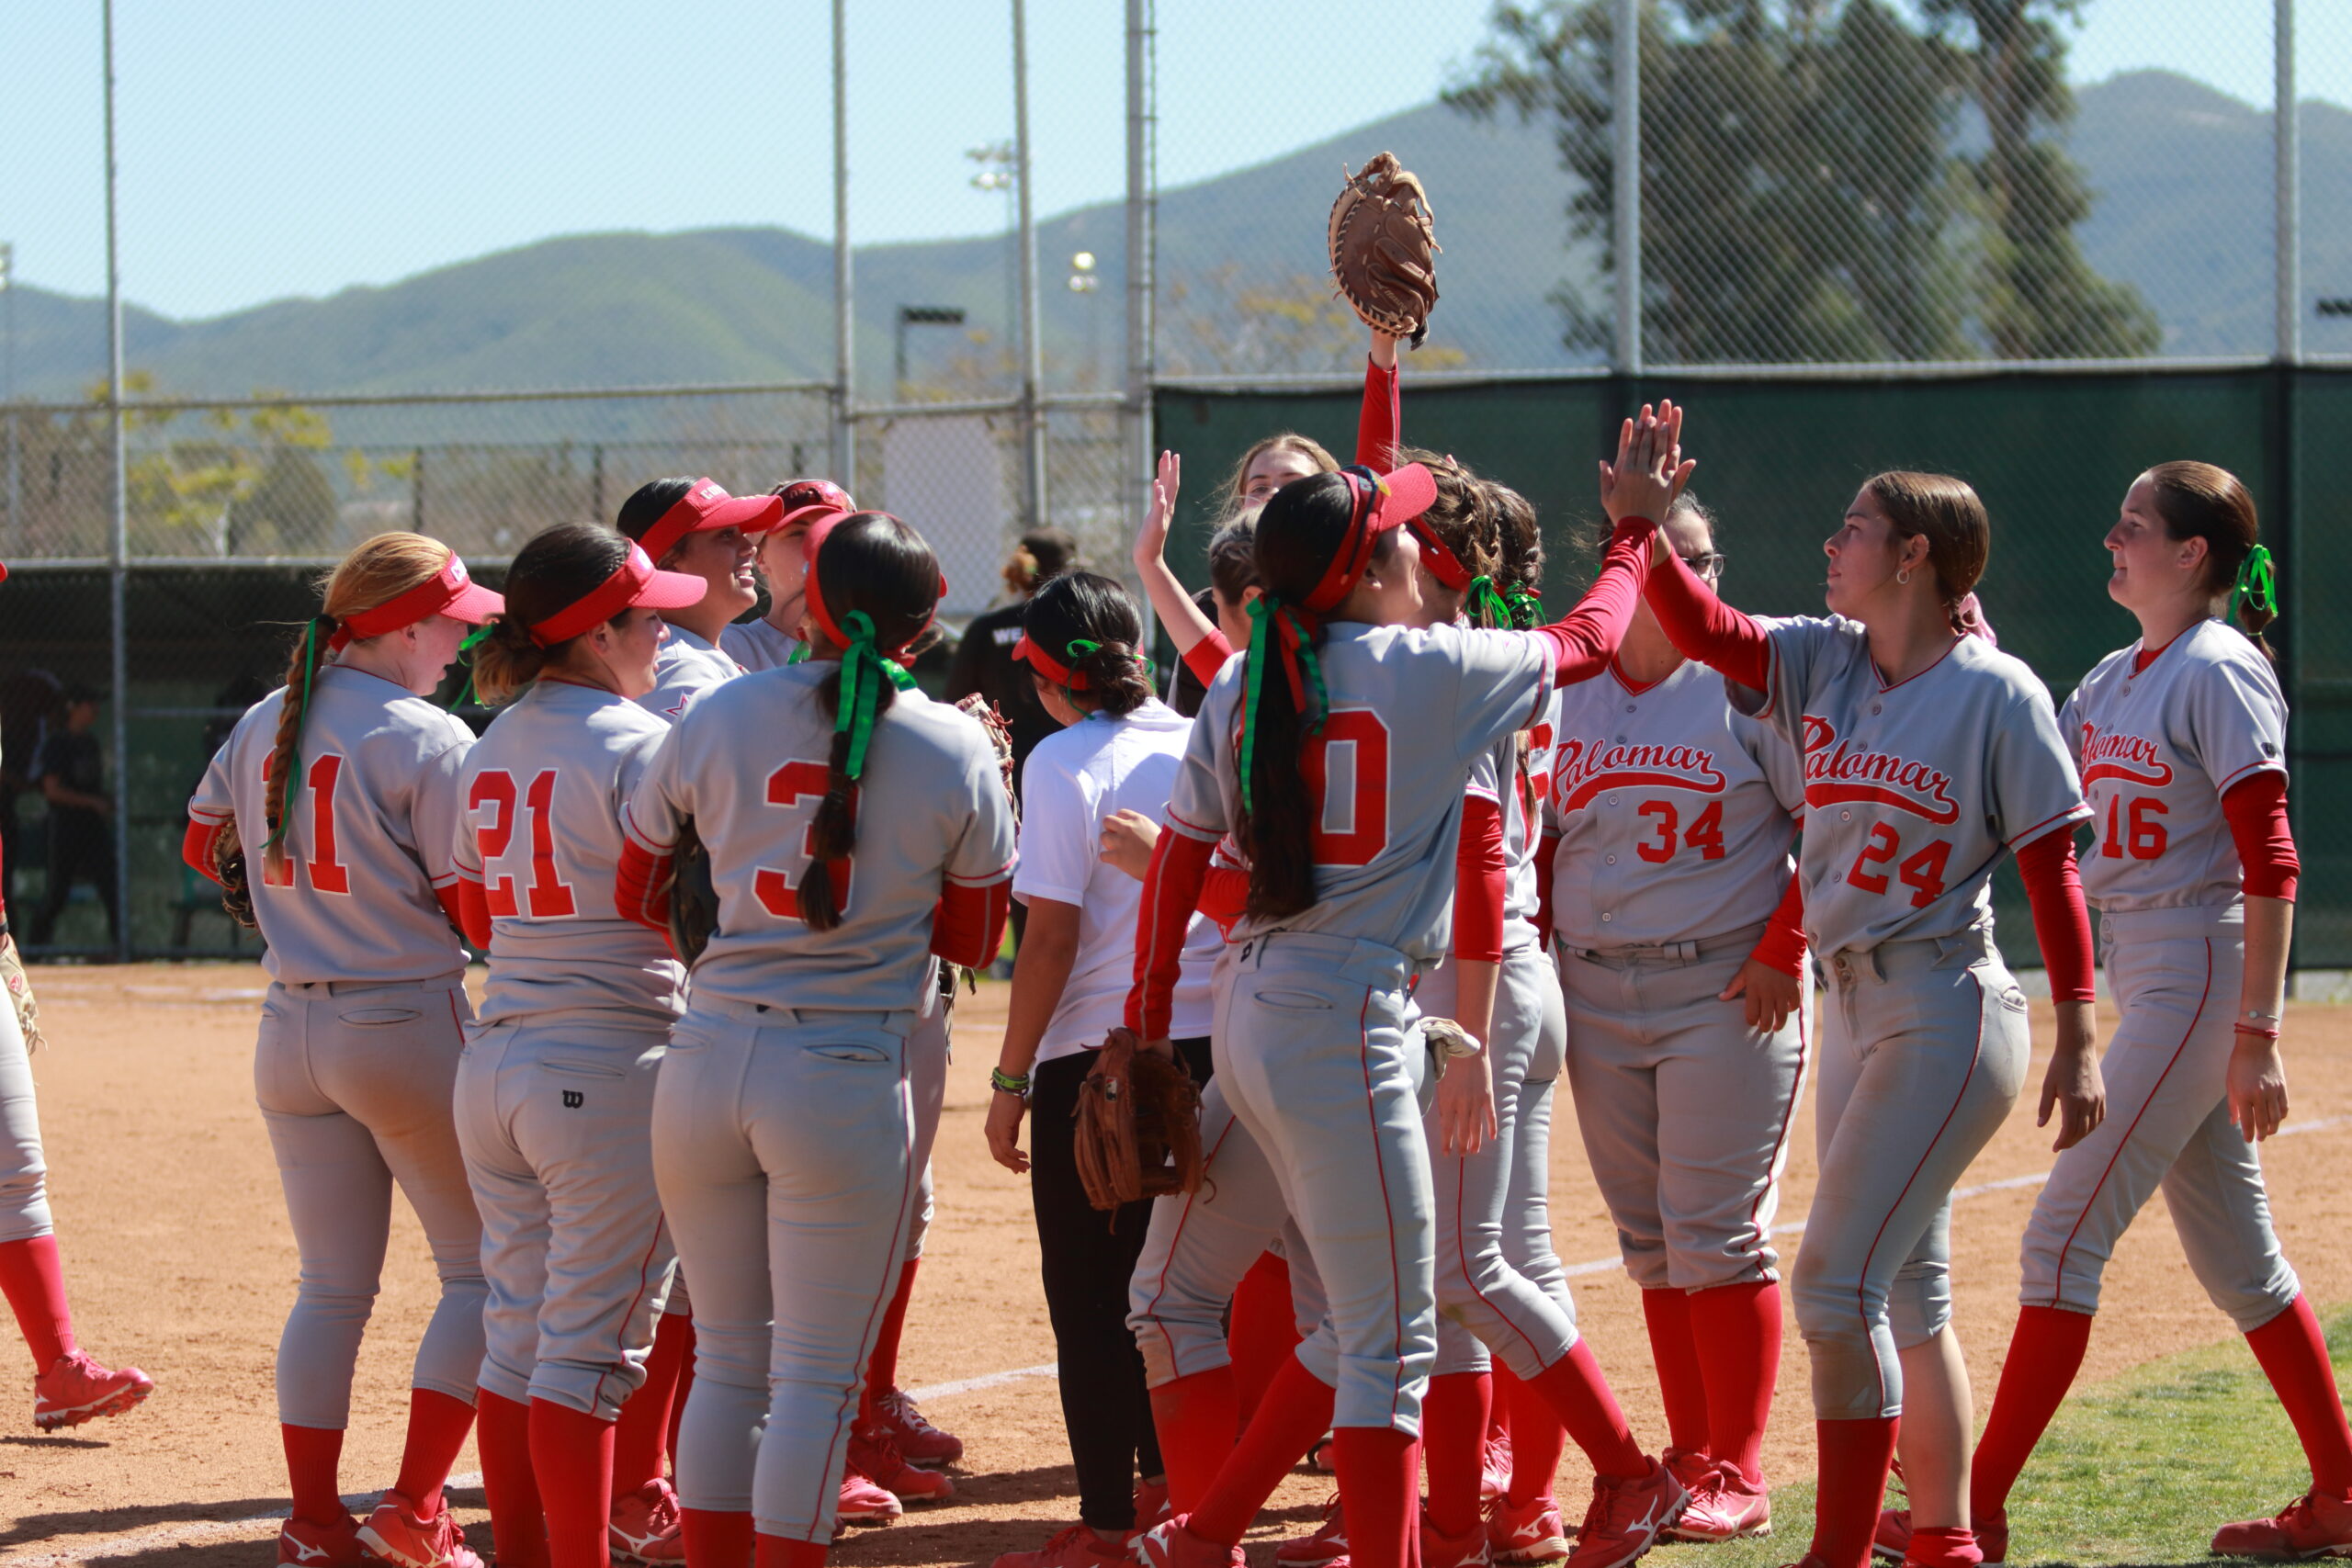 The Palomar College softball team comes together for a celebratory high five at a recent win against Southwestern College on March 17, 2022. (Giovanni Vallido/The Telescope)